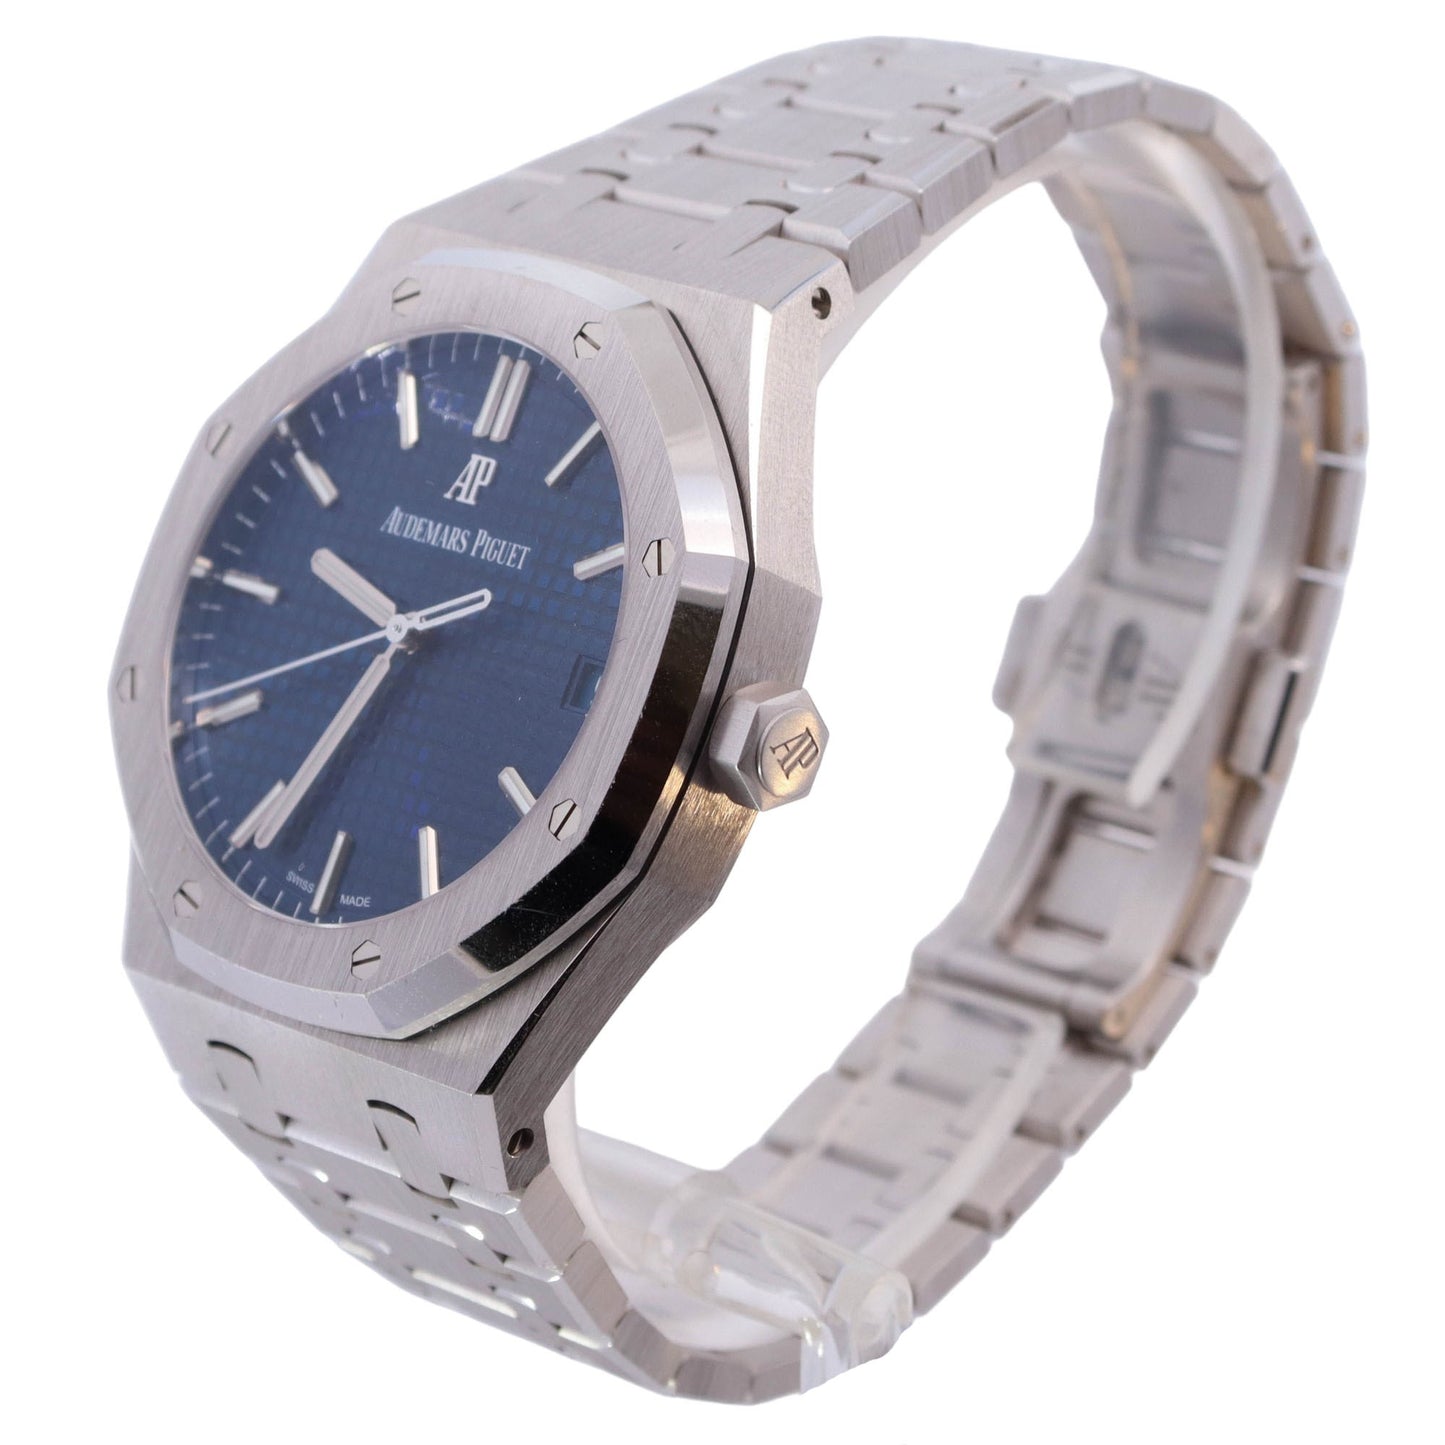 Audemars Piguet Royal Oak "Japan Edition" White Gold 41mm Blue Stick Dial Watch Reference# 15503BC.OO.1220BC.01 - Happy Jewelers Fine Jewelry Lifetime Warranty